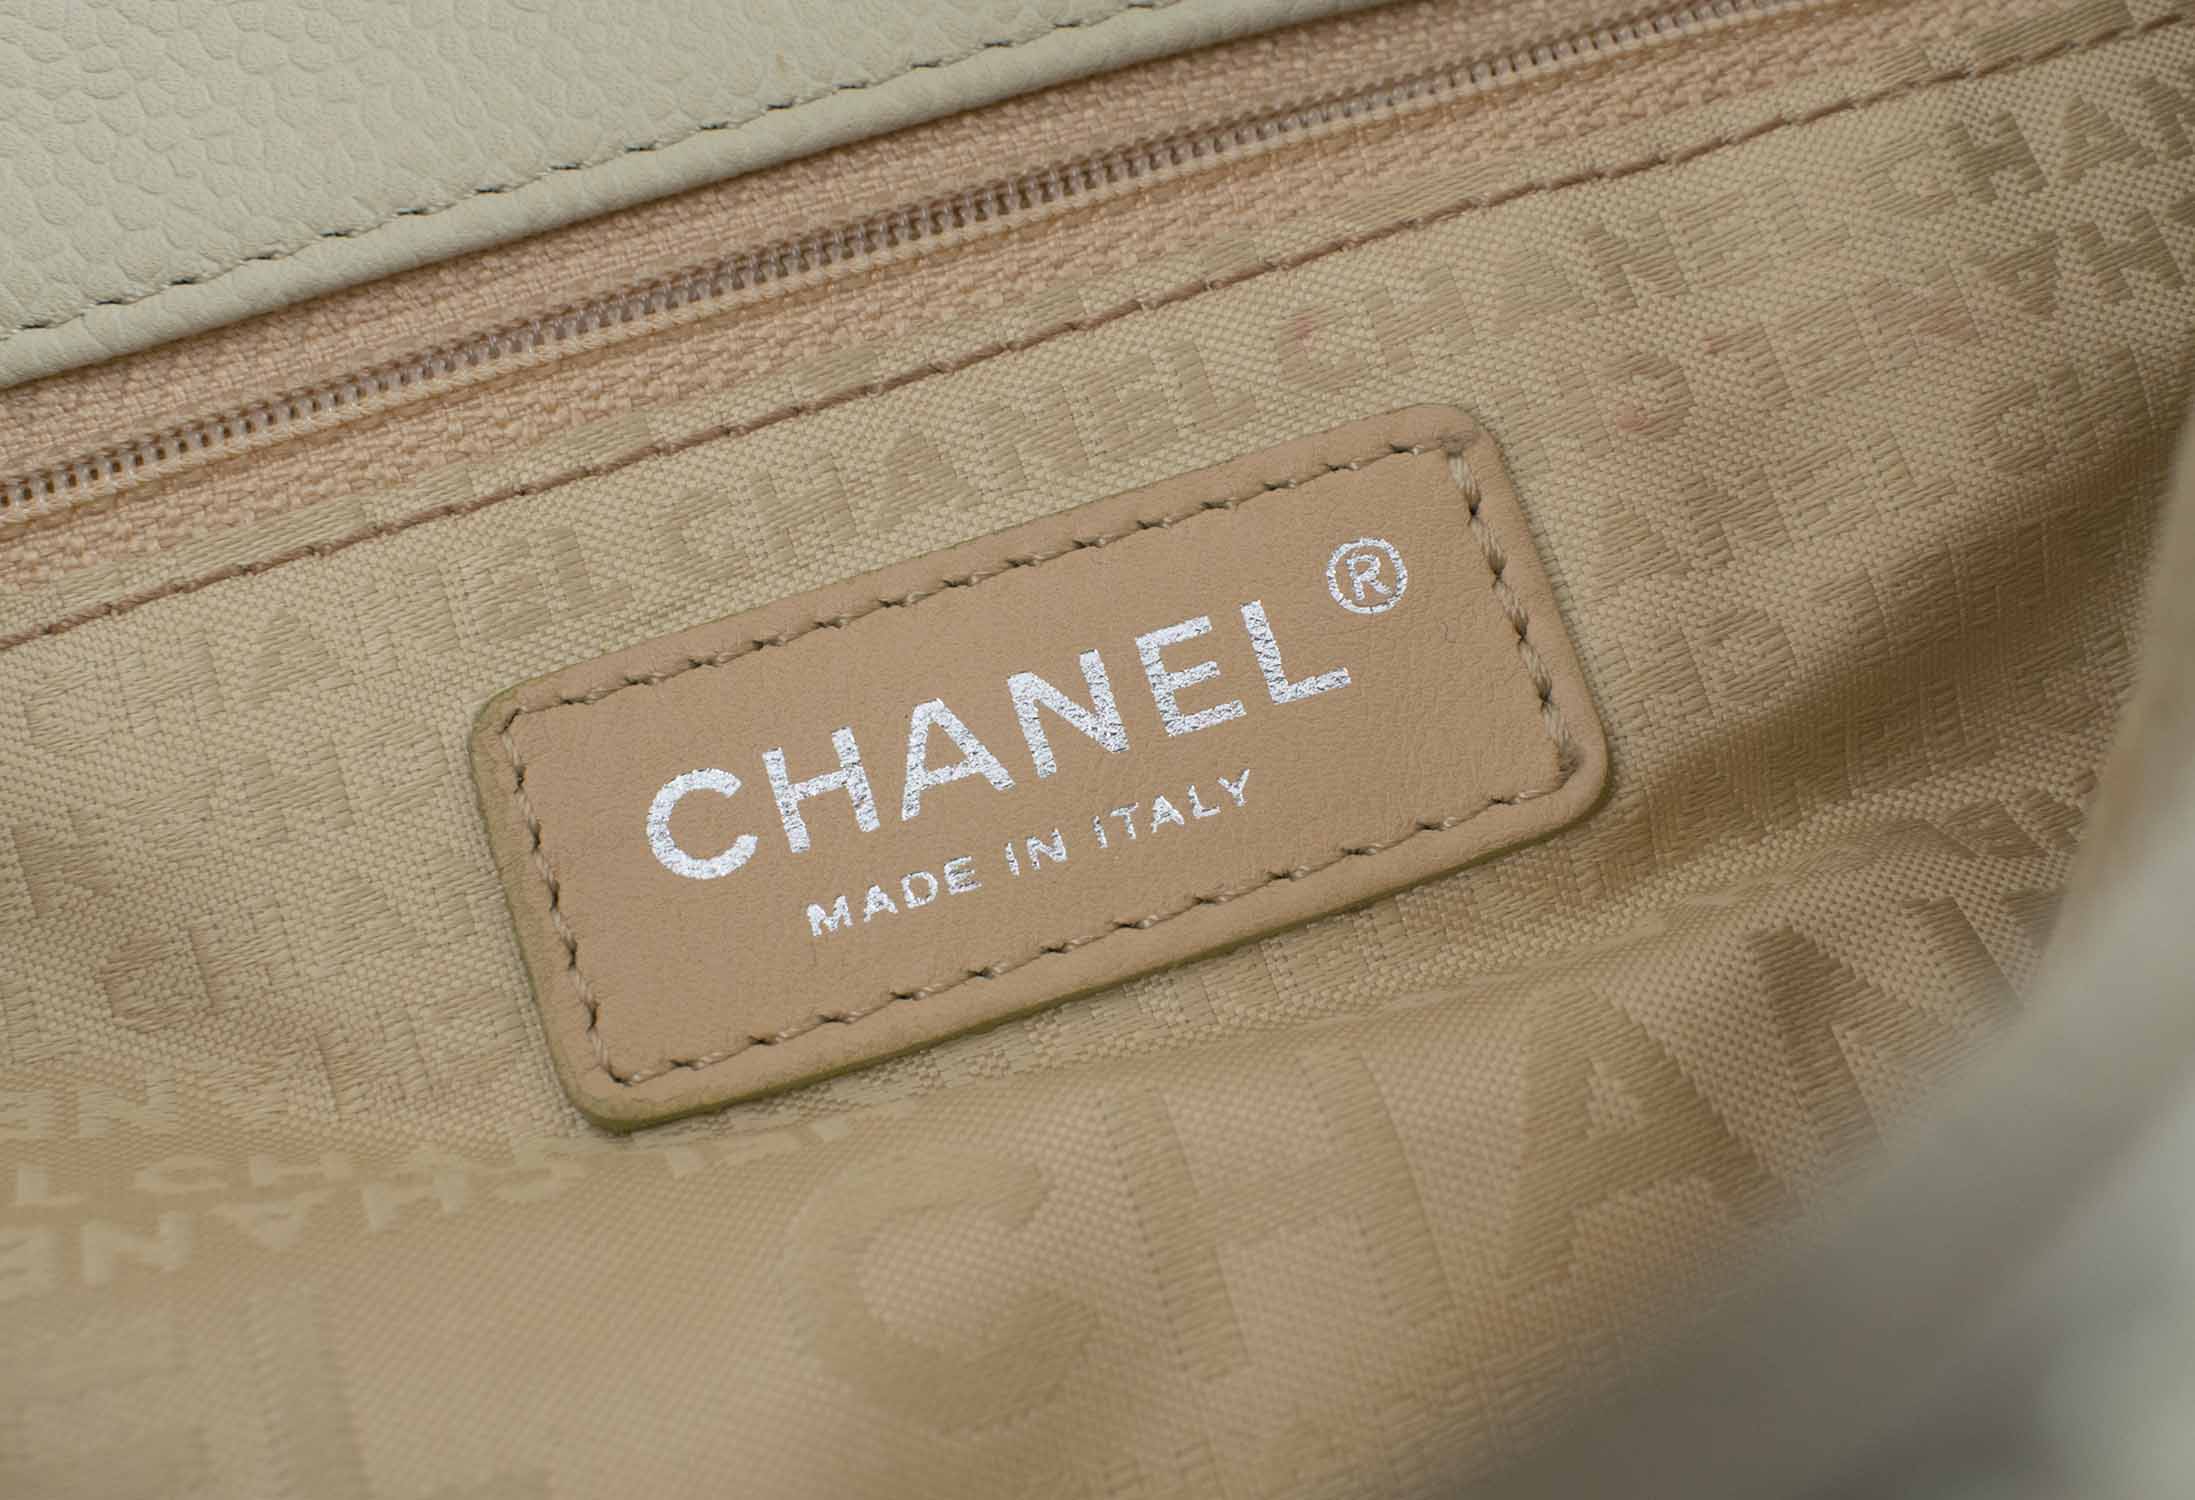 CHANEL TOTE HANDBAG, flap closure with iconic CC logo at the front,  interwoven leather and chain strap with shoulder pad, fabric lining with  zipper pocket, silver tone hardware, authenticity card 2004/2005, with